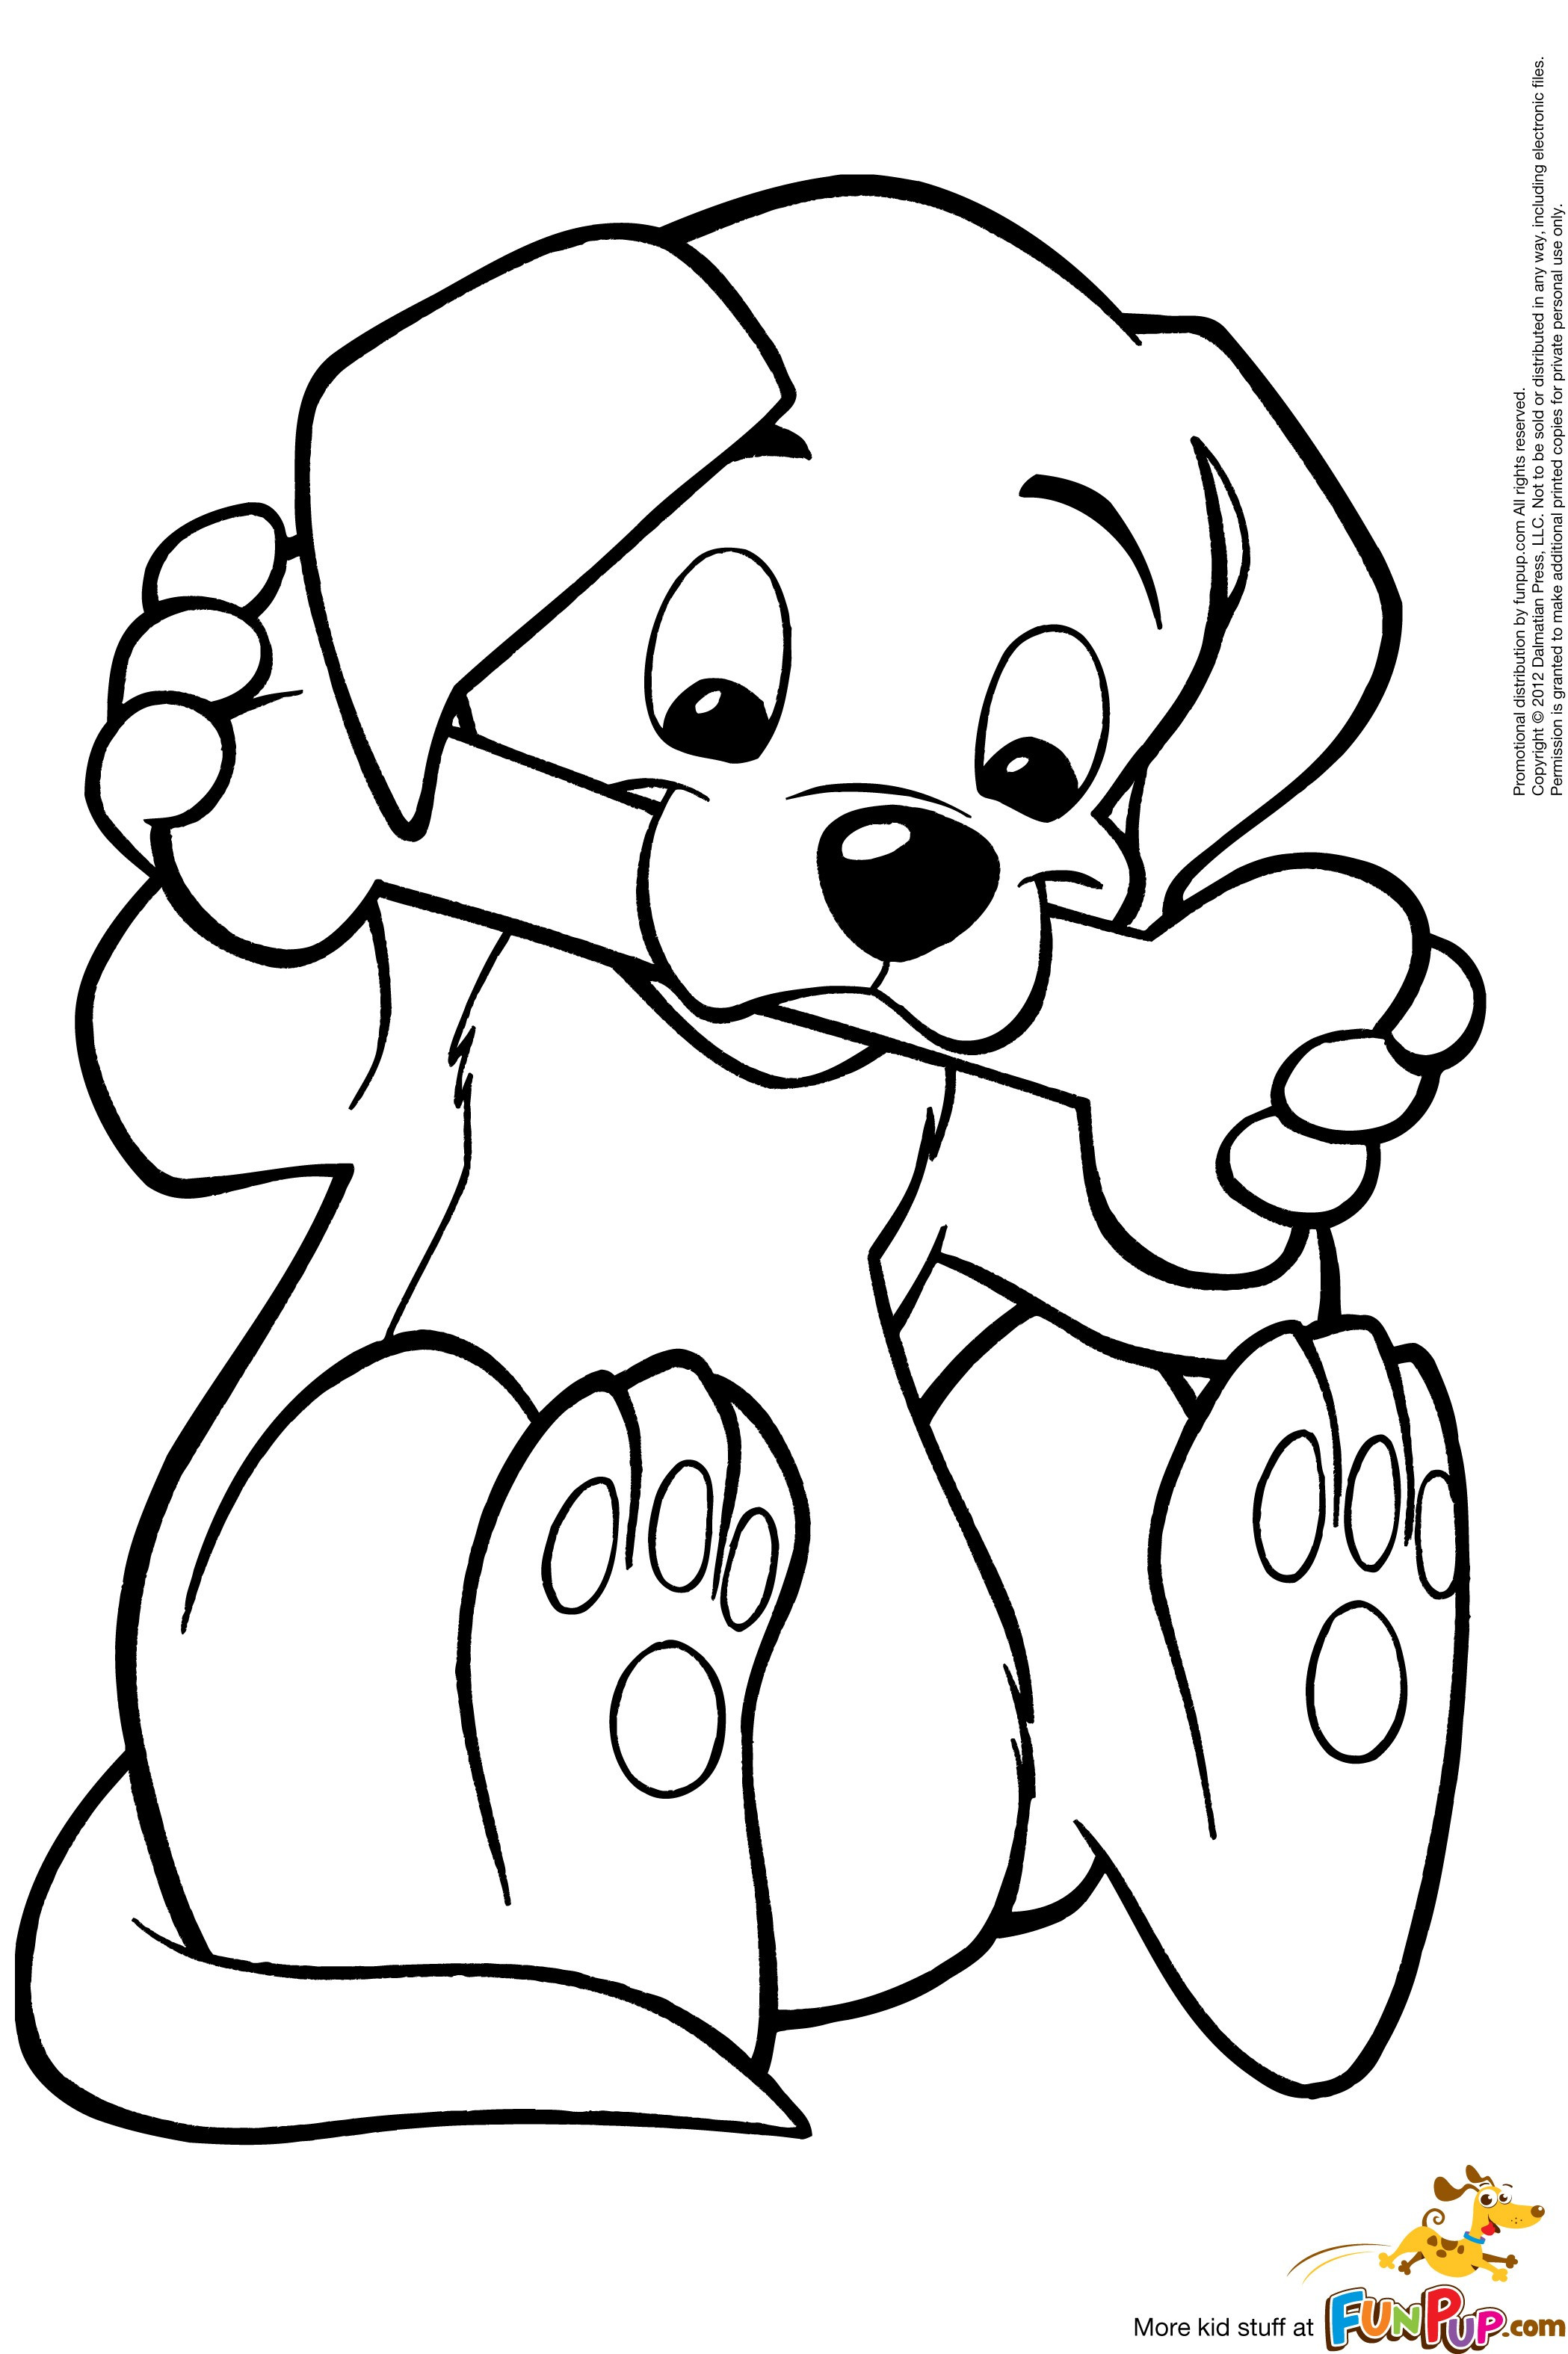 A Dog Coloring Sheets For Kids Of Grantie
 Puppy coloring pages